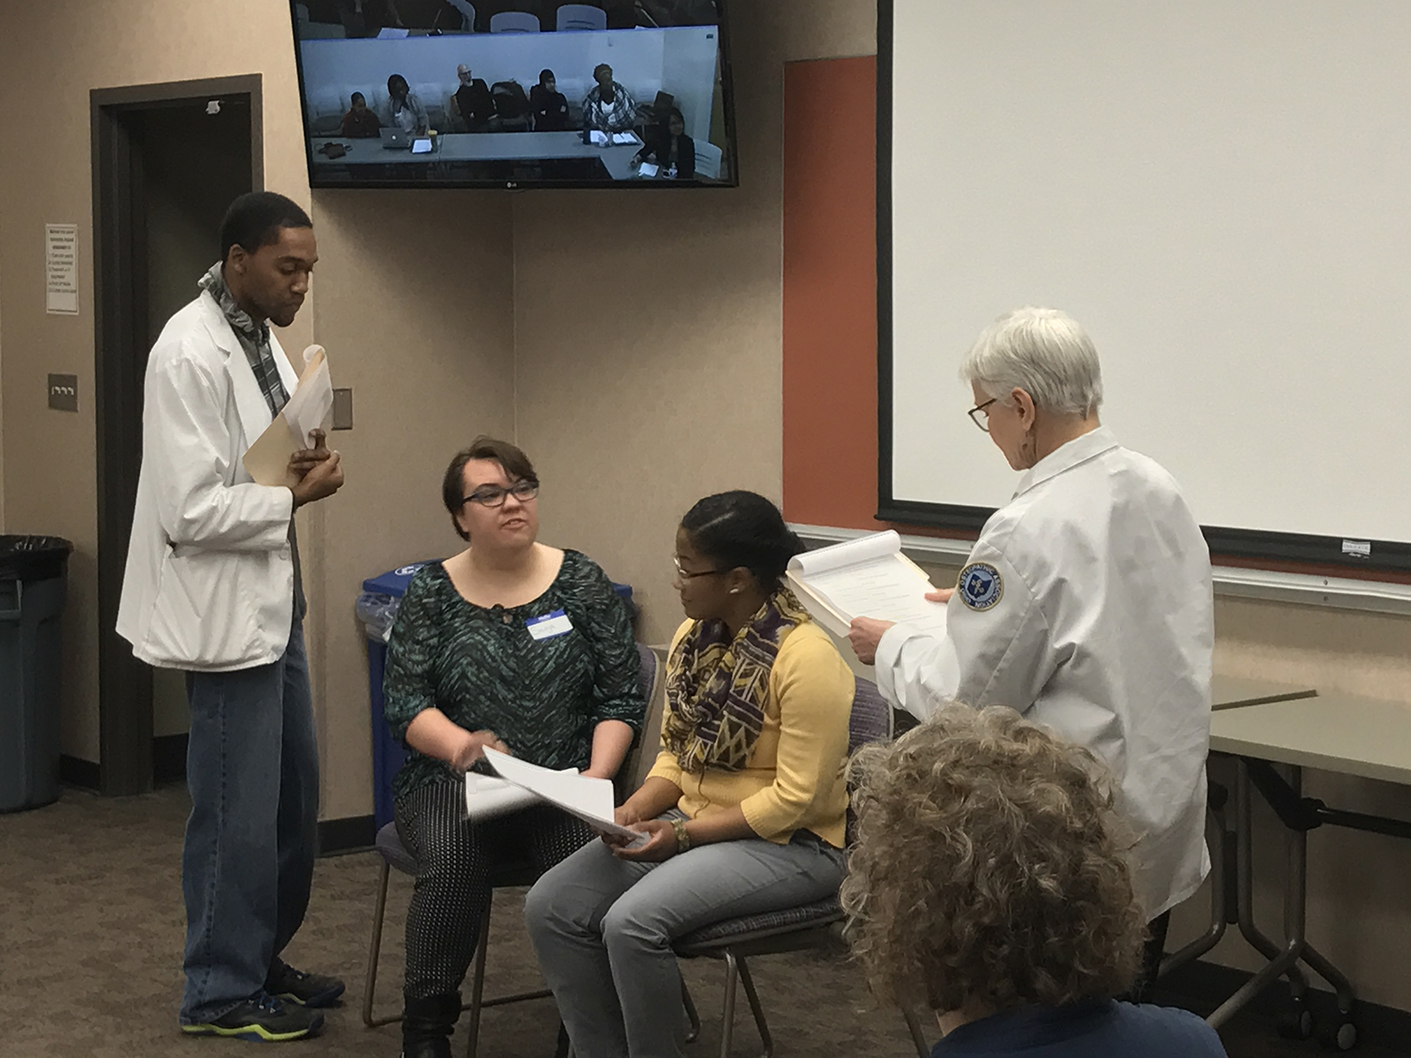 Participants use forum theater techniques in a workshop titled “Responding to Racism in Clinical Settings.”